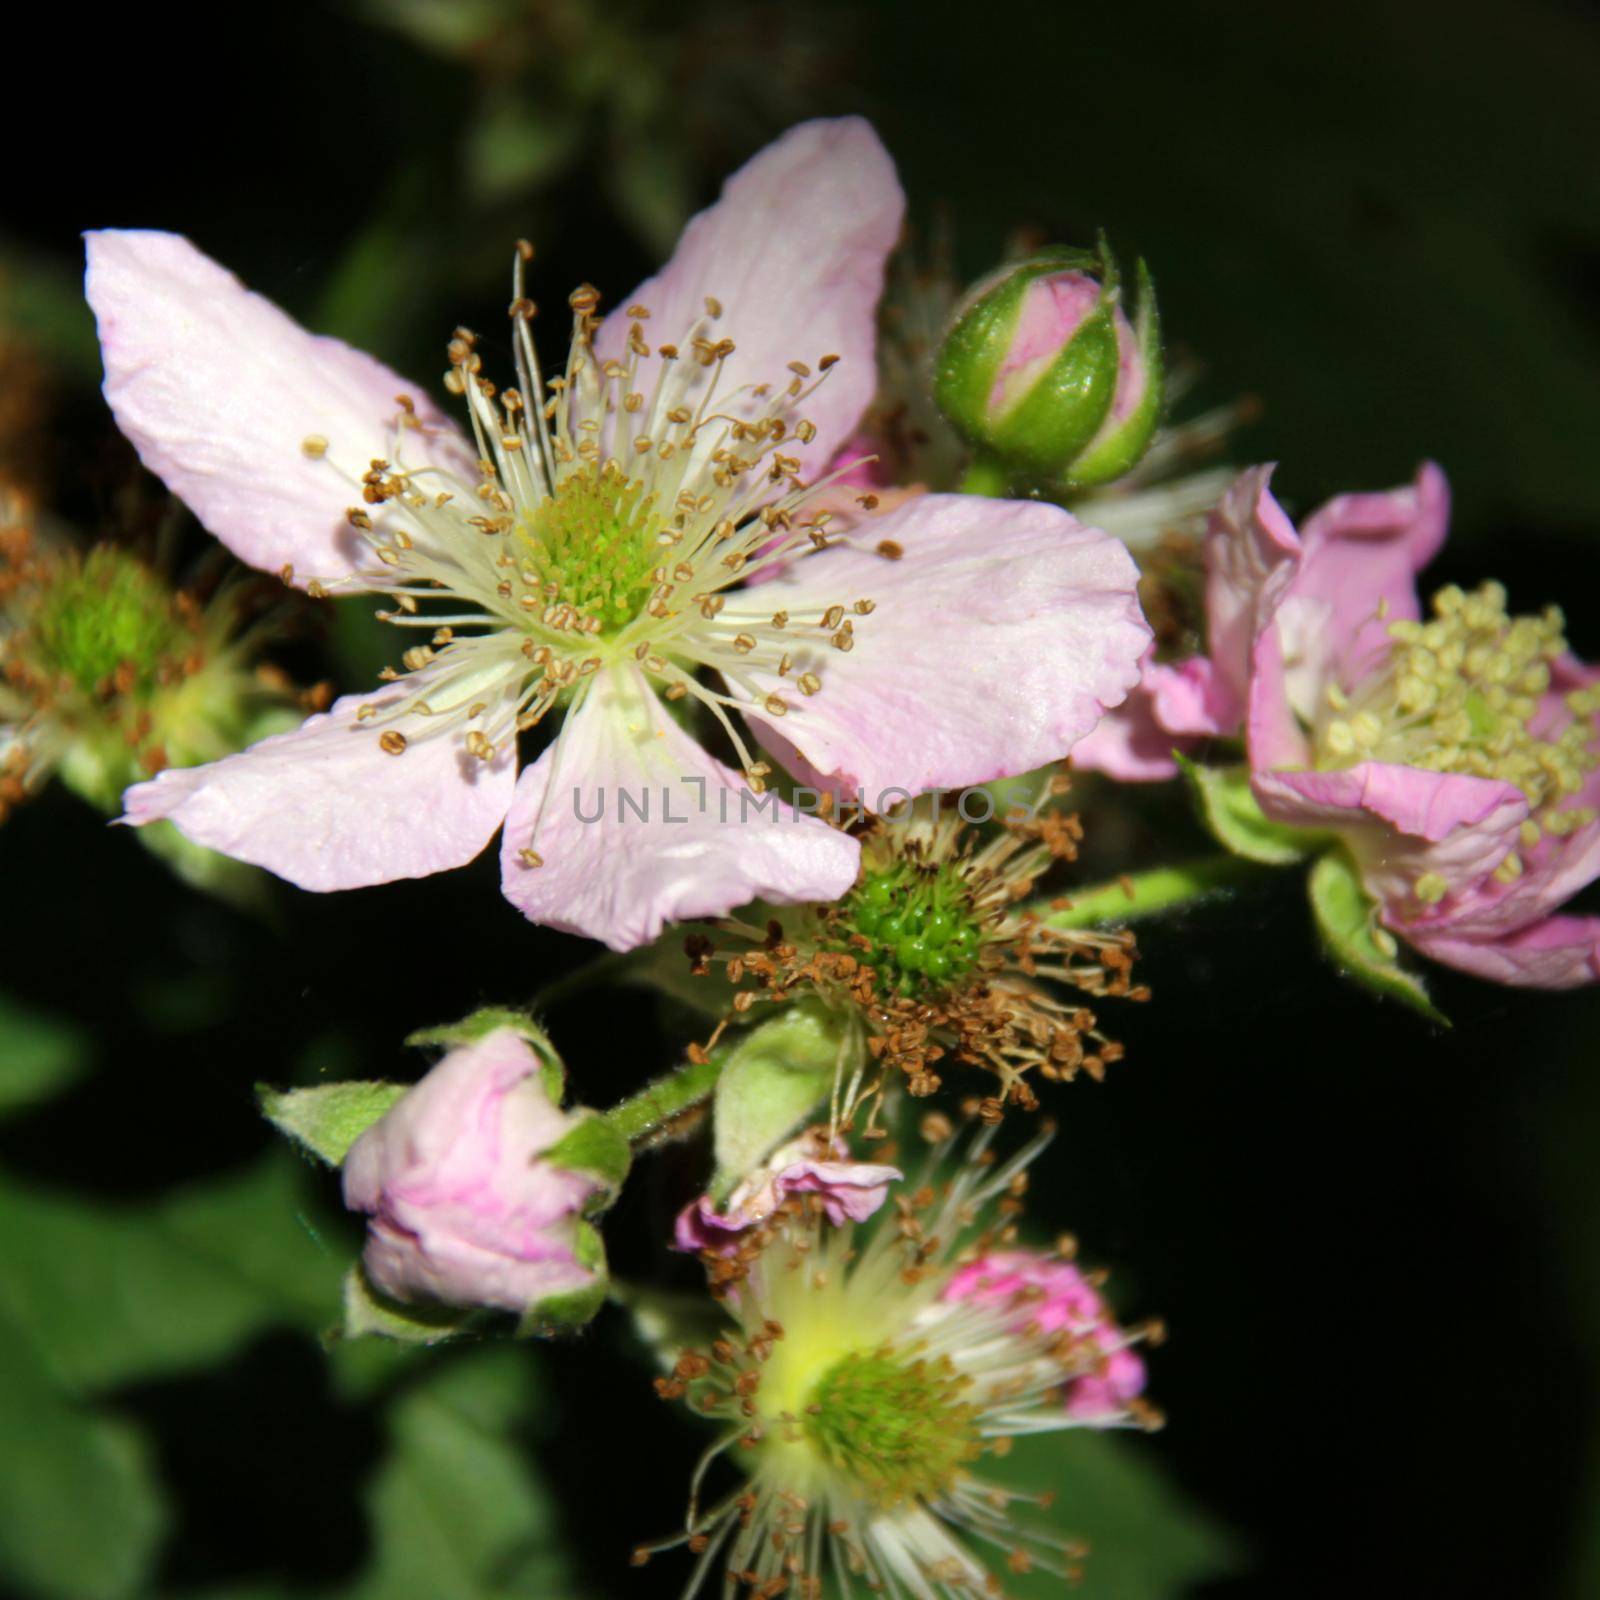 Blackberry blossom by Bwise